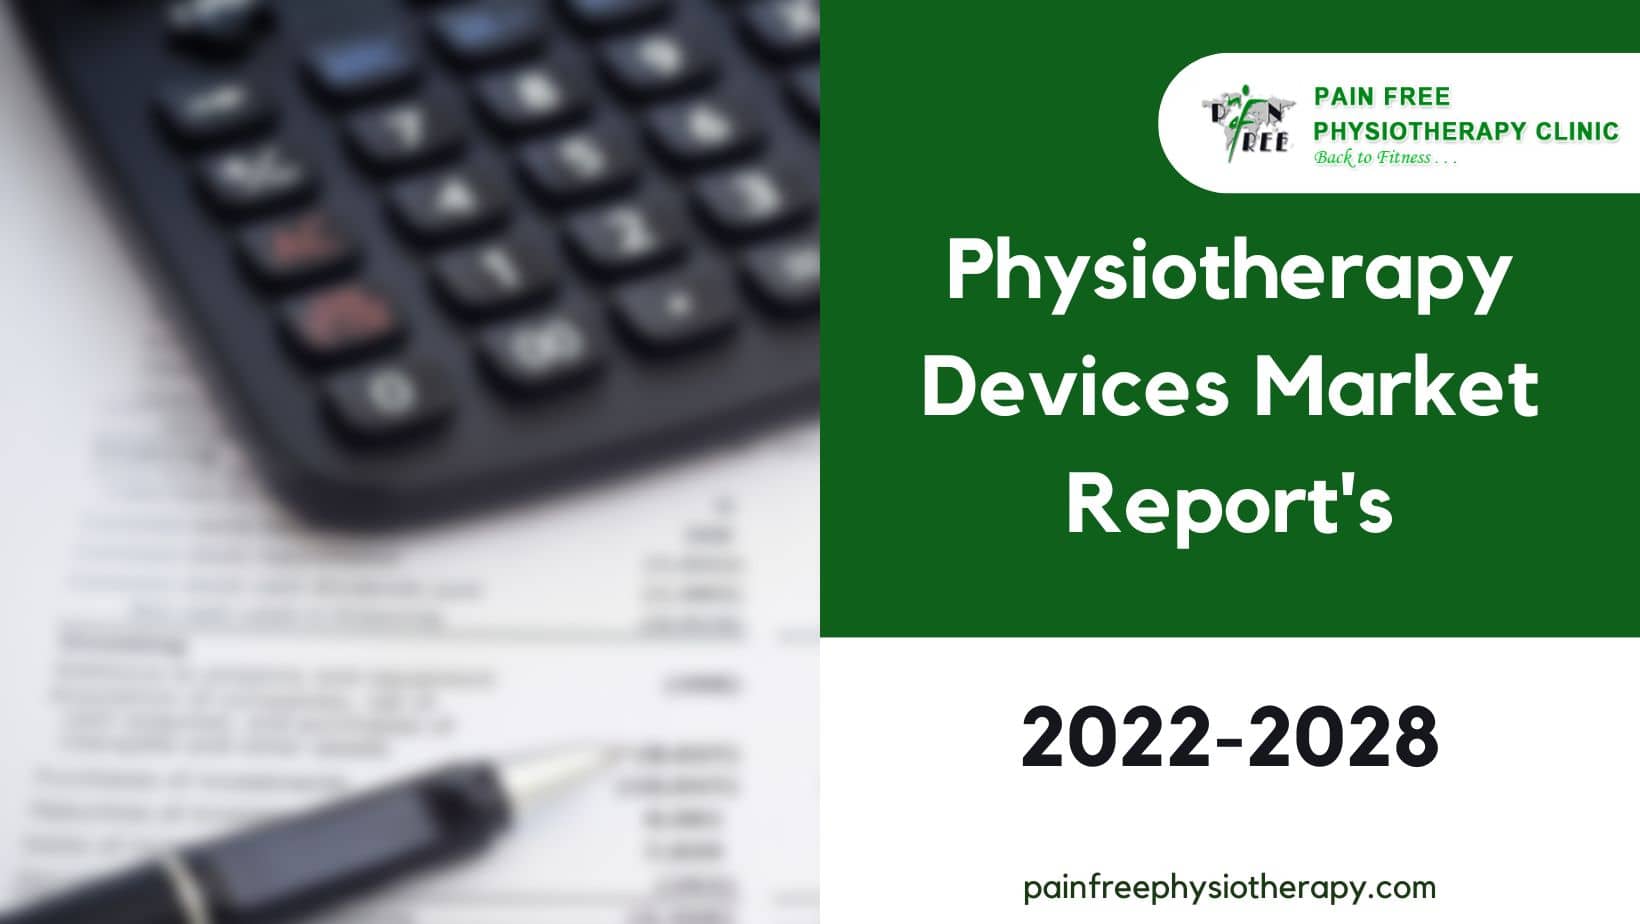 Physiotherapy Devices Market Report's | Pain free Physiotherapy Clinic